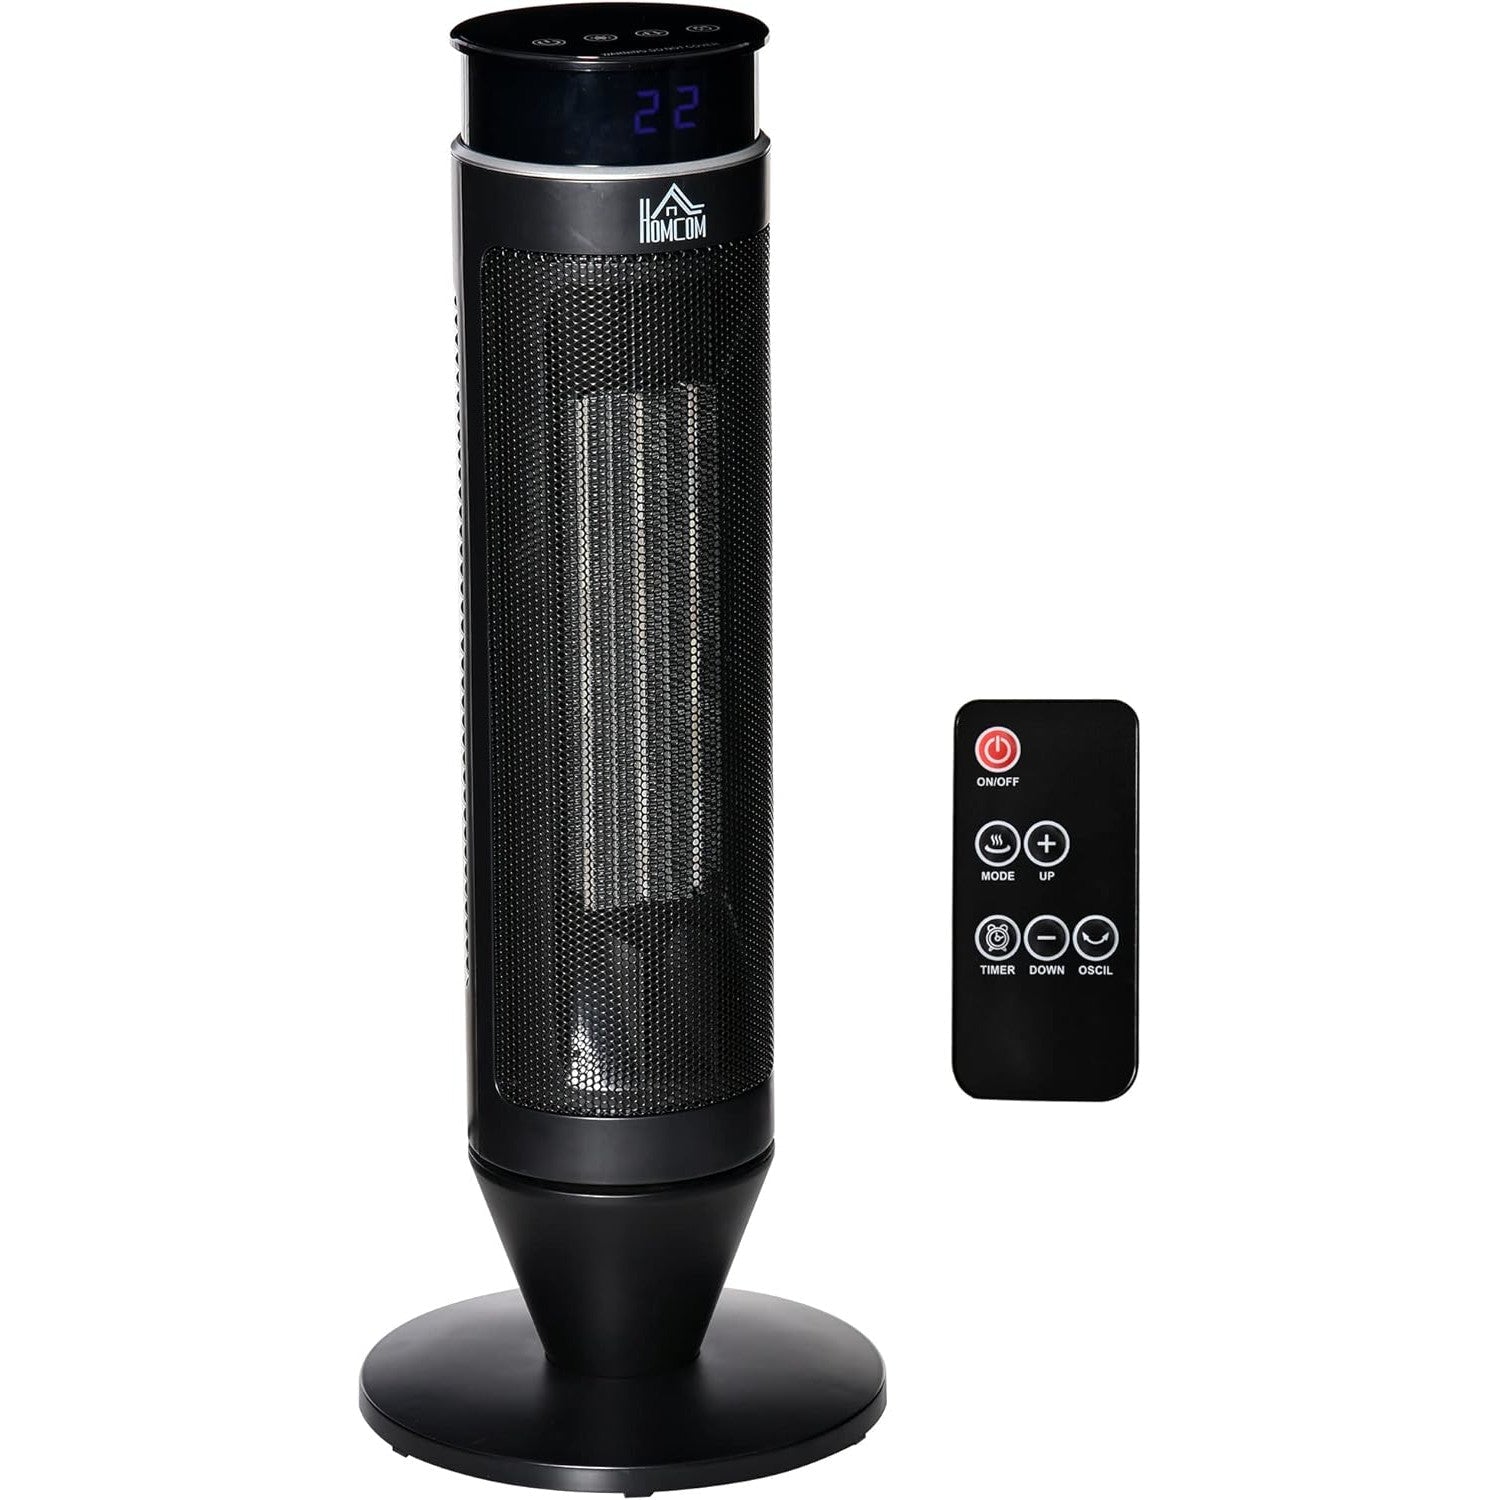 Maplin 42° Oscillation Indoor Ceramic Tower Space Heater with Remote Control & Timer - Black - maplin.co.uk